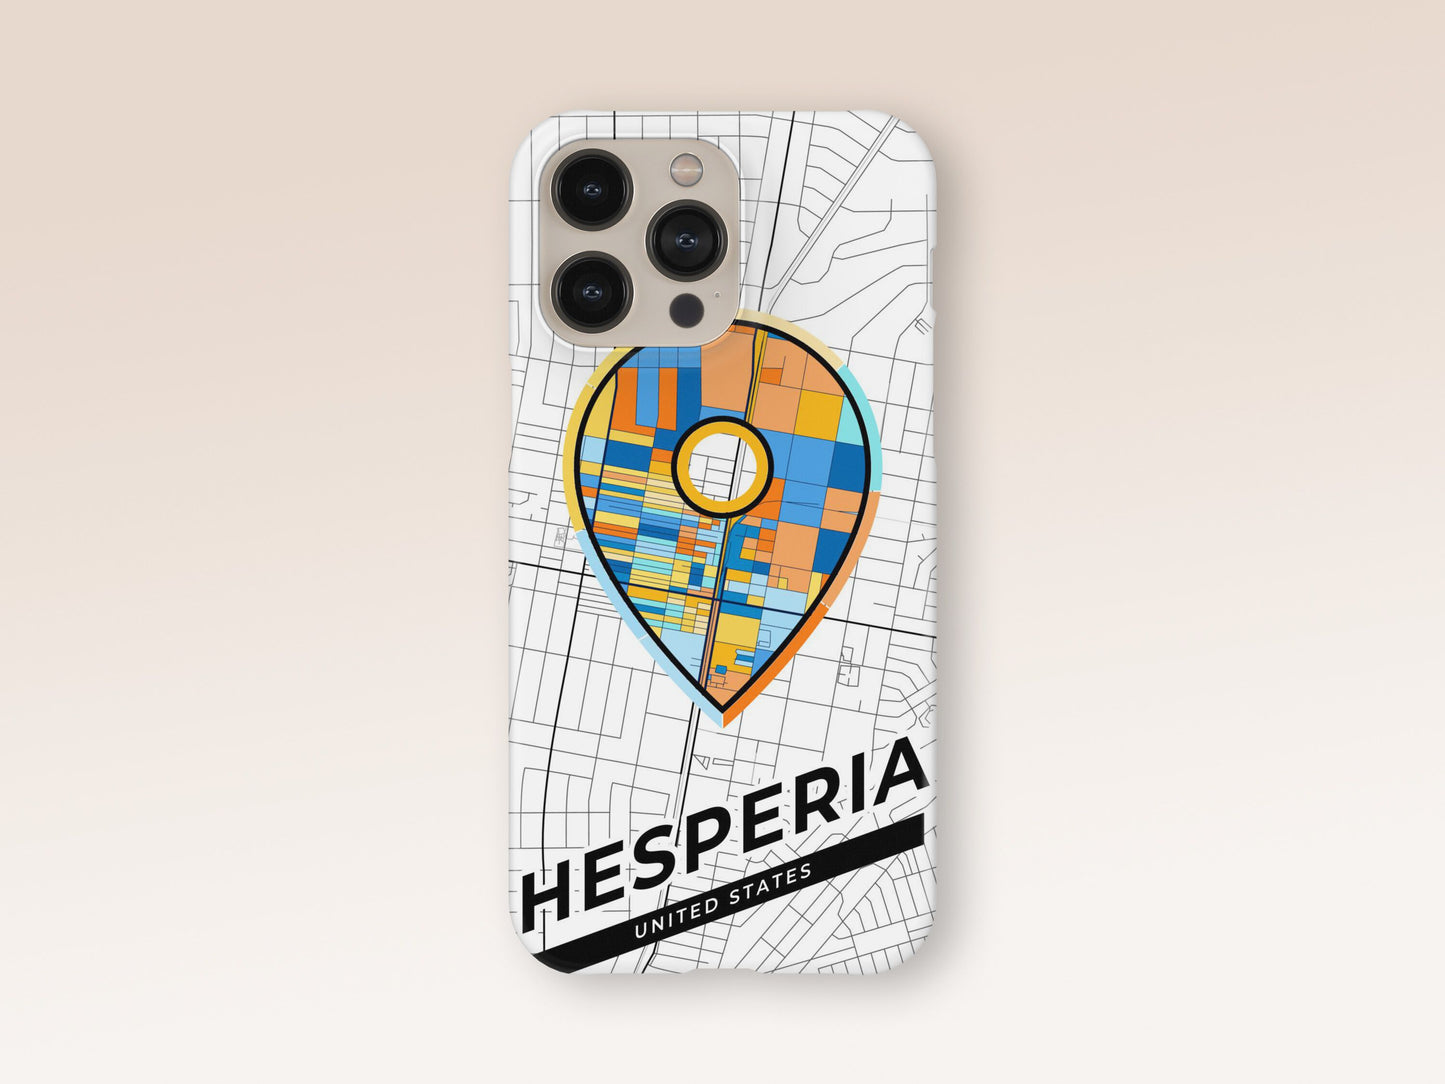 Hesperia California slim phone case with colorful icon. Birthday, wedding or housewarming gift. Couple match cases. 1